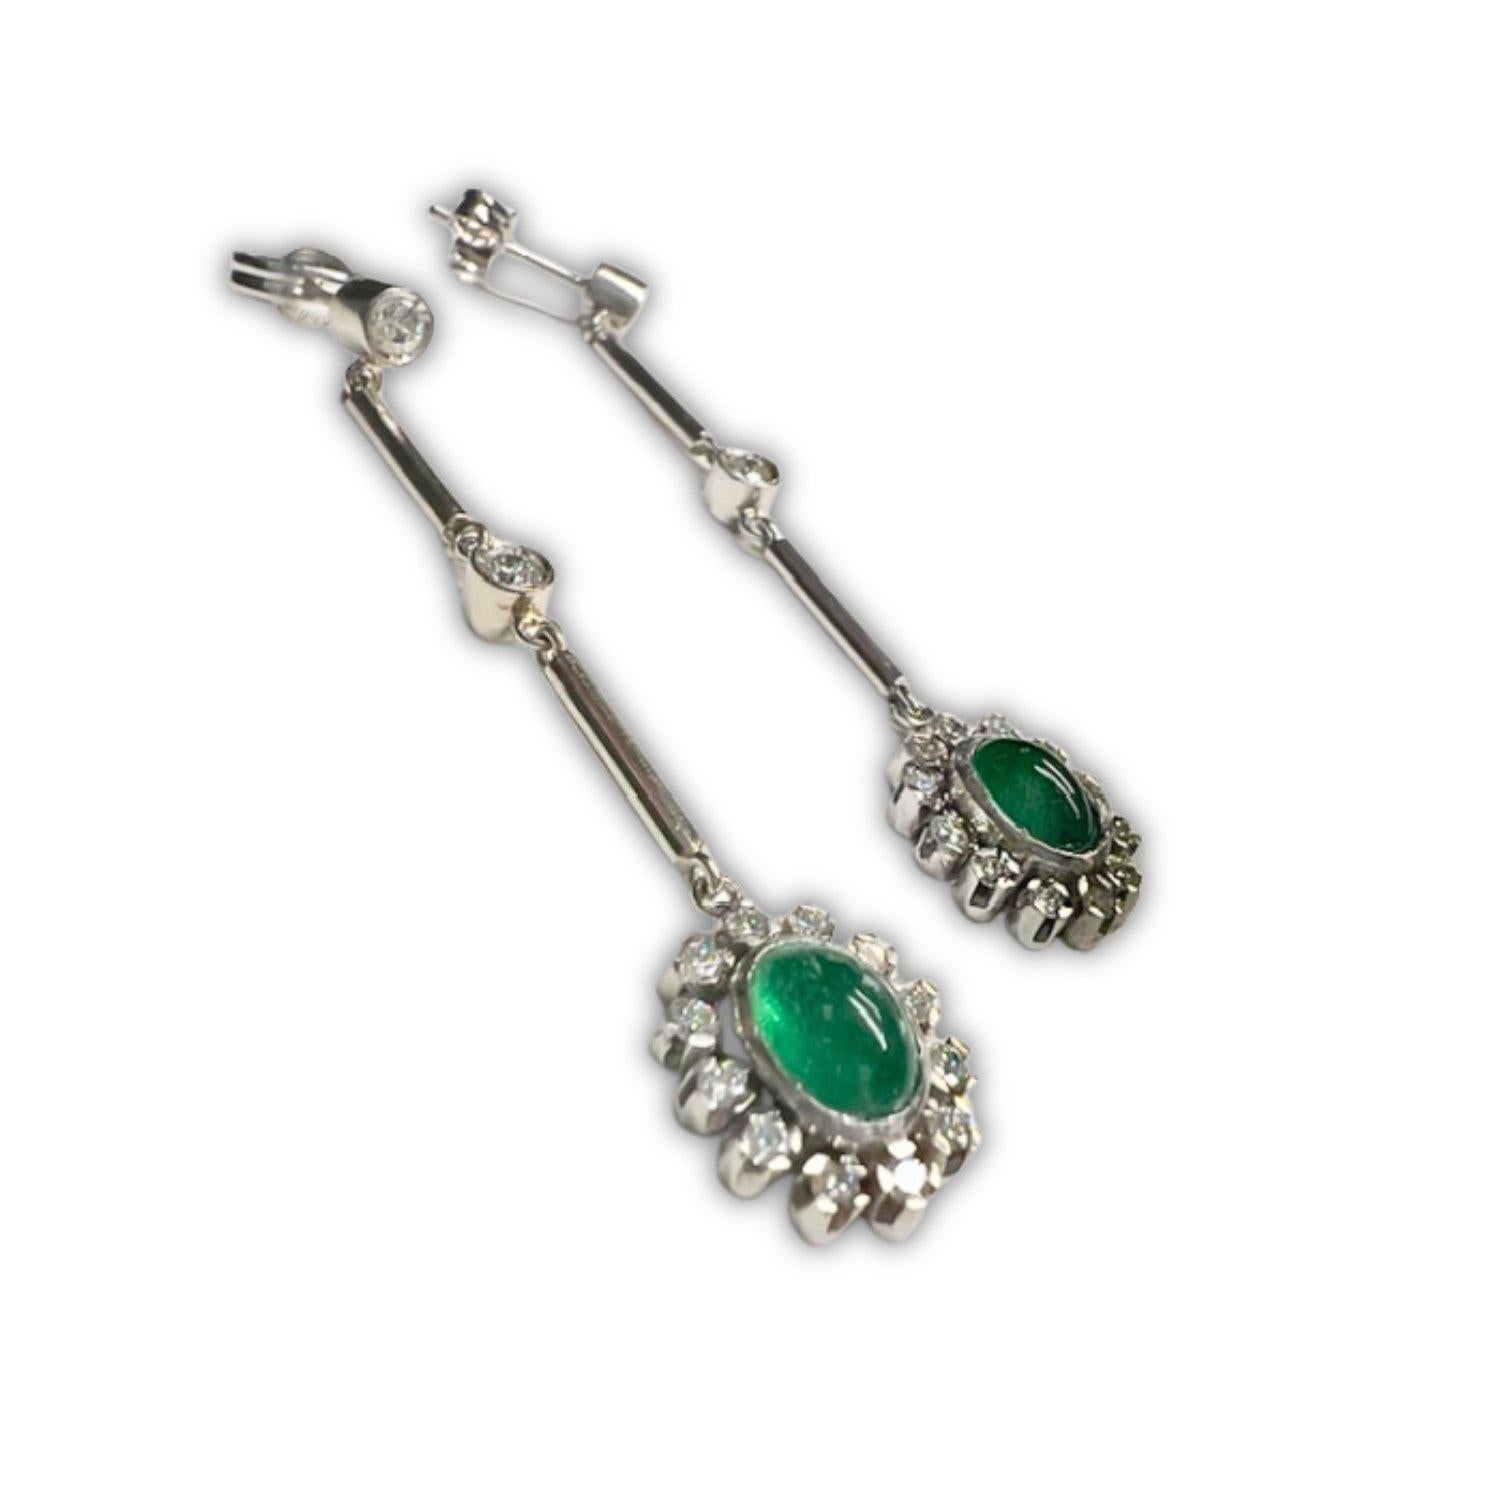 Discover the exquisite beauty of Art Deco with these platinum 950 karat earrings adorned with diamonds and a Colombian emerald. Weighing 7.52 grams and measuring 4.8 cm in length and 1 cm in width, these earrings are a statement of sophistication